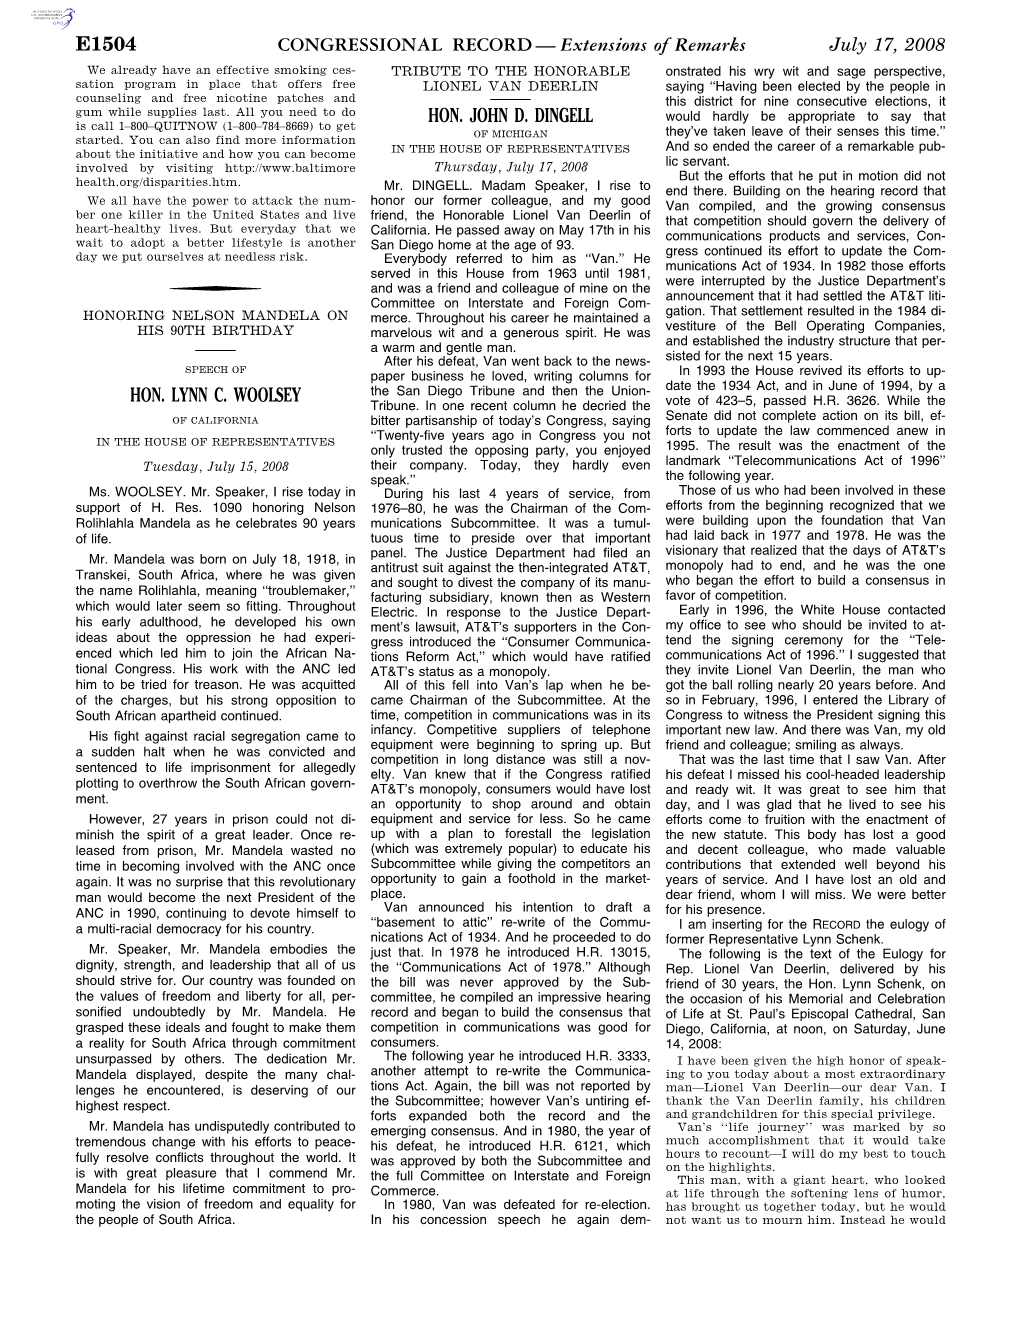 CONGRESSIONAL RECORD— Extensions of Remarks E1504 HON. LYNN C. WOOLSEY HON. JOHN D. DINGELL